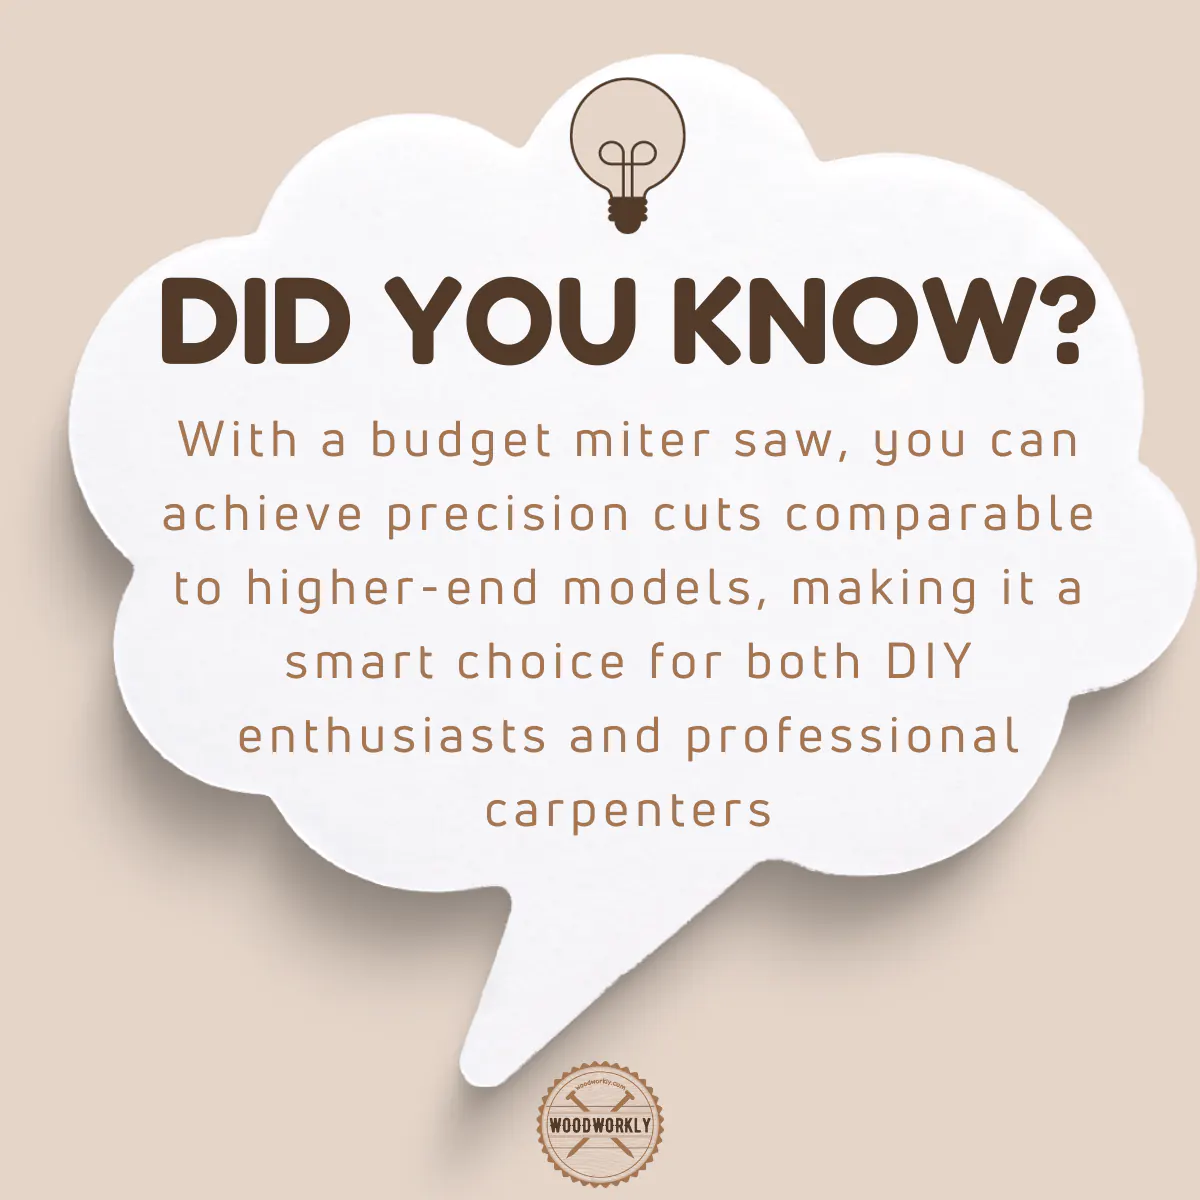 Did you know fact using a budget miter saw